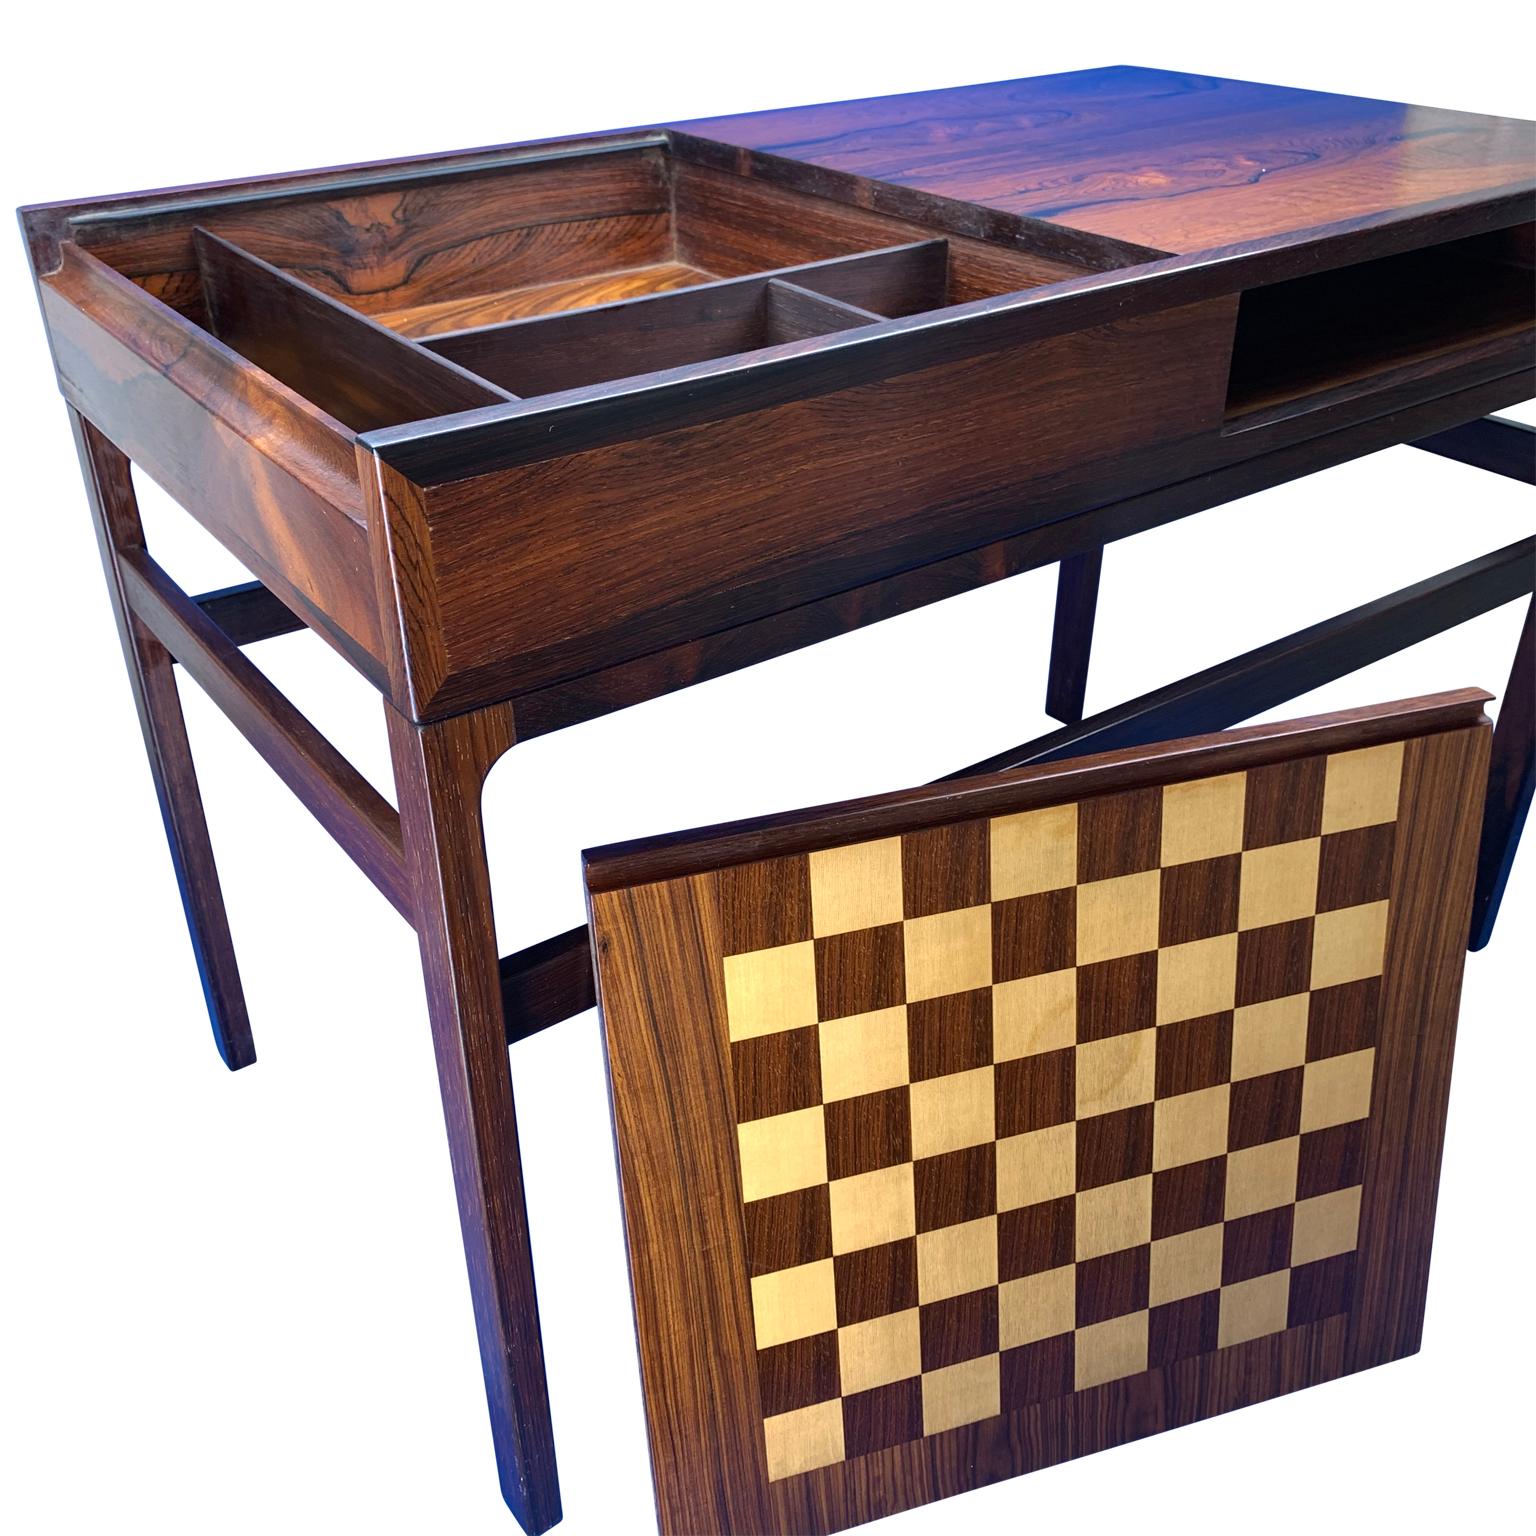 Amazing Danish Mid-Century Modern rosewood magazine and chess game table.
One half of the tabletop pulls out, flips to second as a chess board game. Compartments for chess pieces and deck of card under the flippable chess board.

Complimentary front